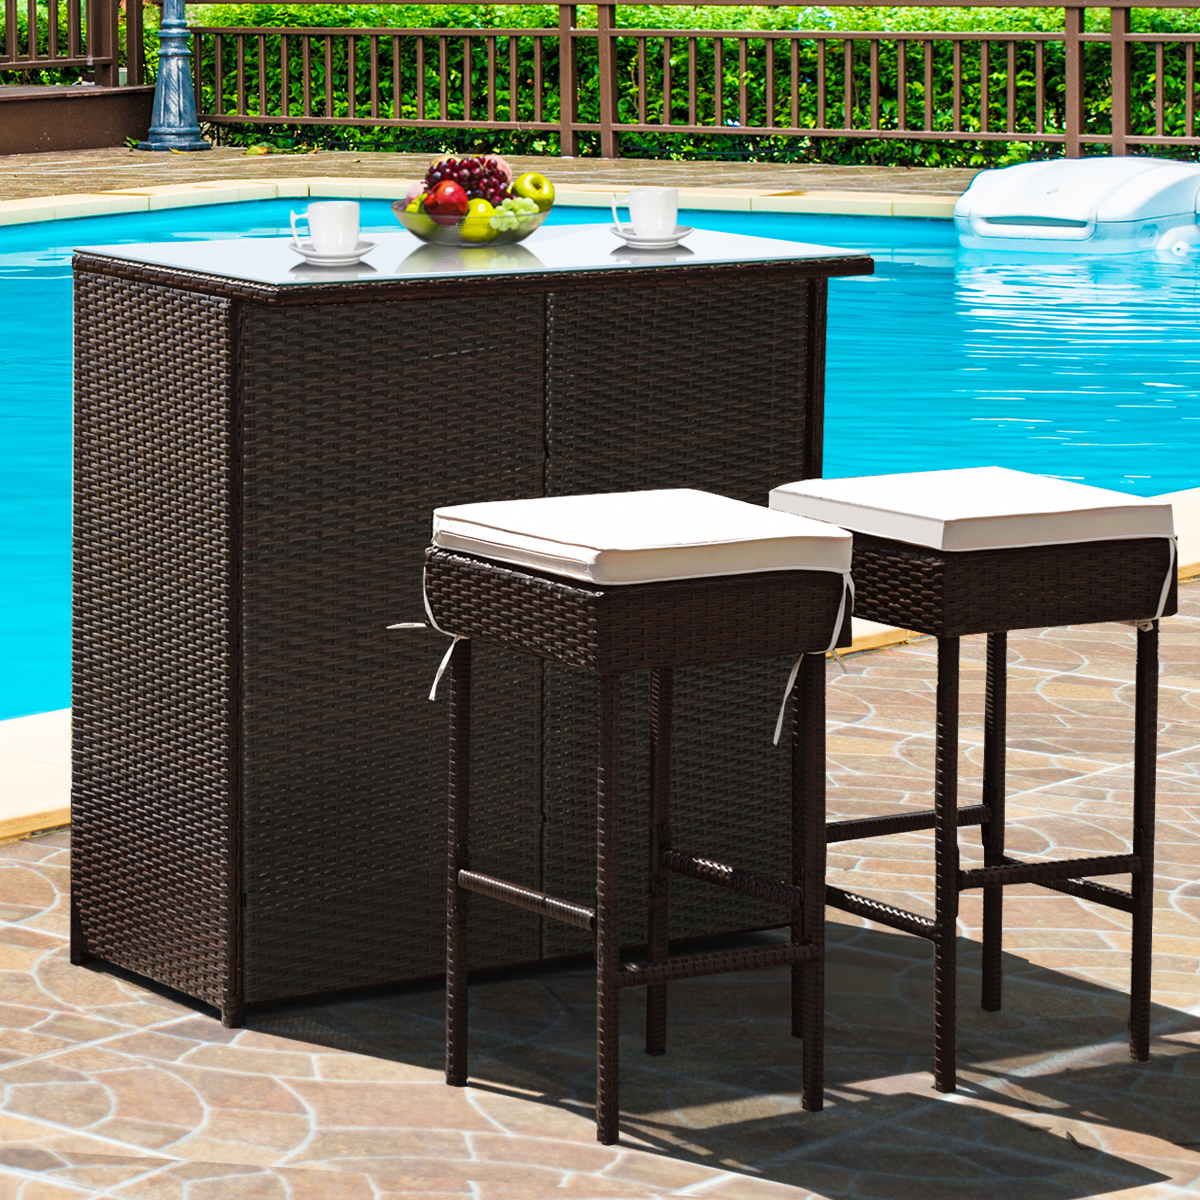 Costway 3PCS Patio Rattan Wicker Bar Table Stools Dining Set Cushioned Chairs Garden - image 1 of 10